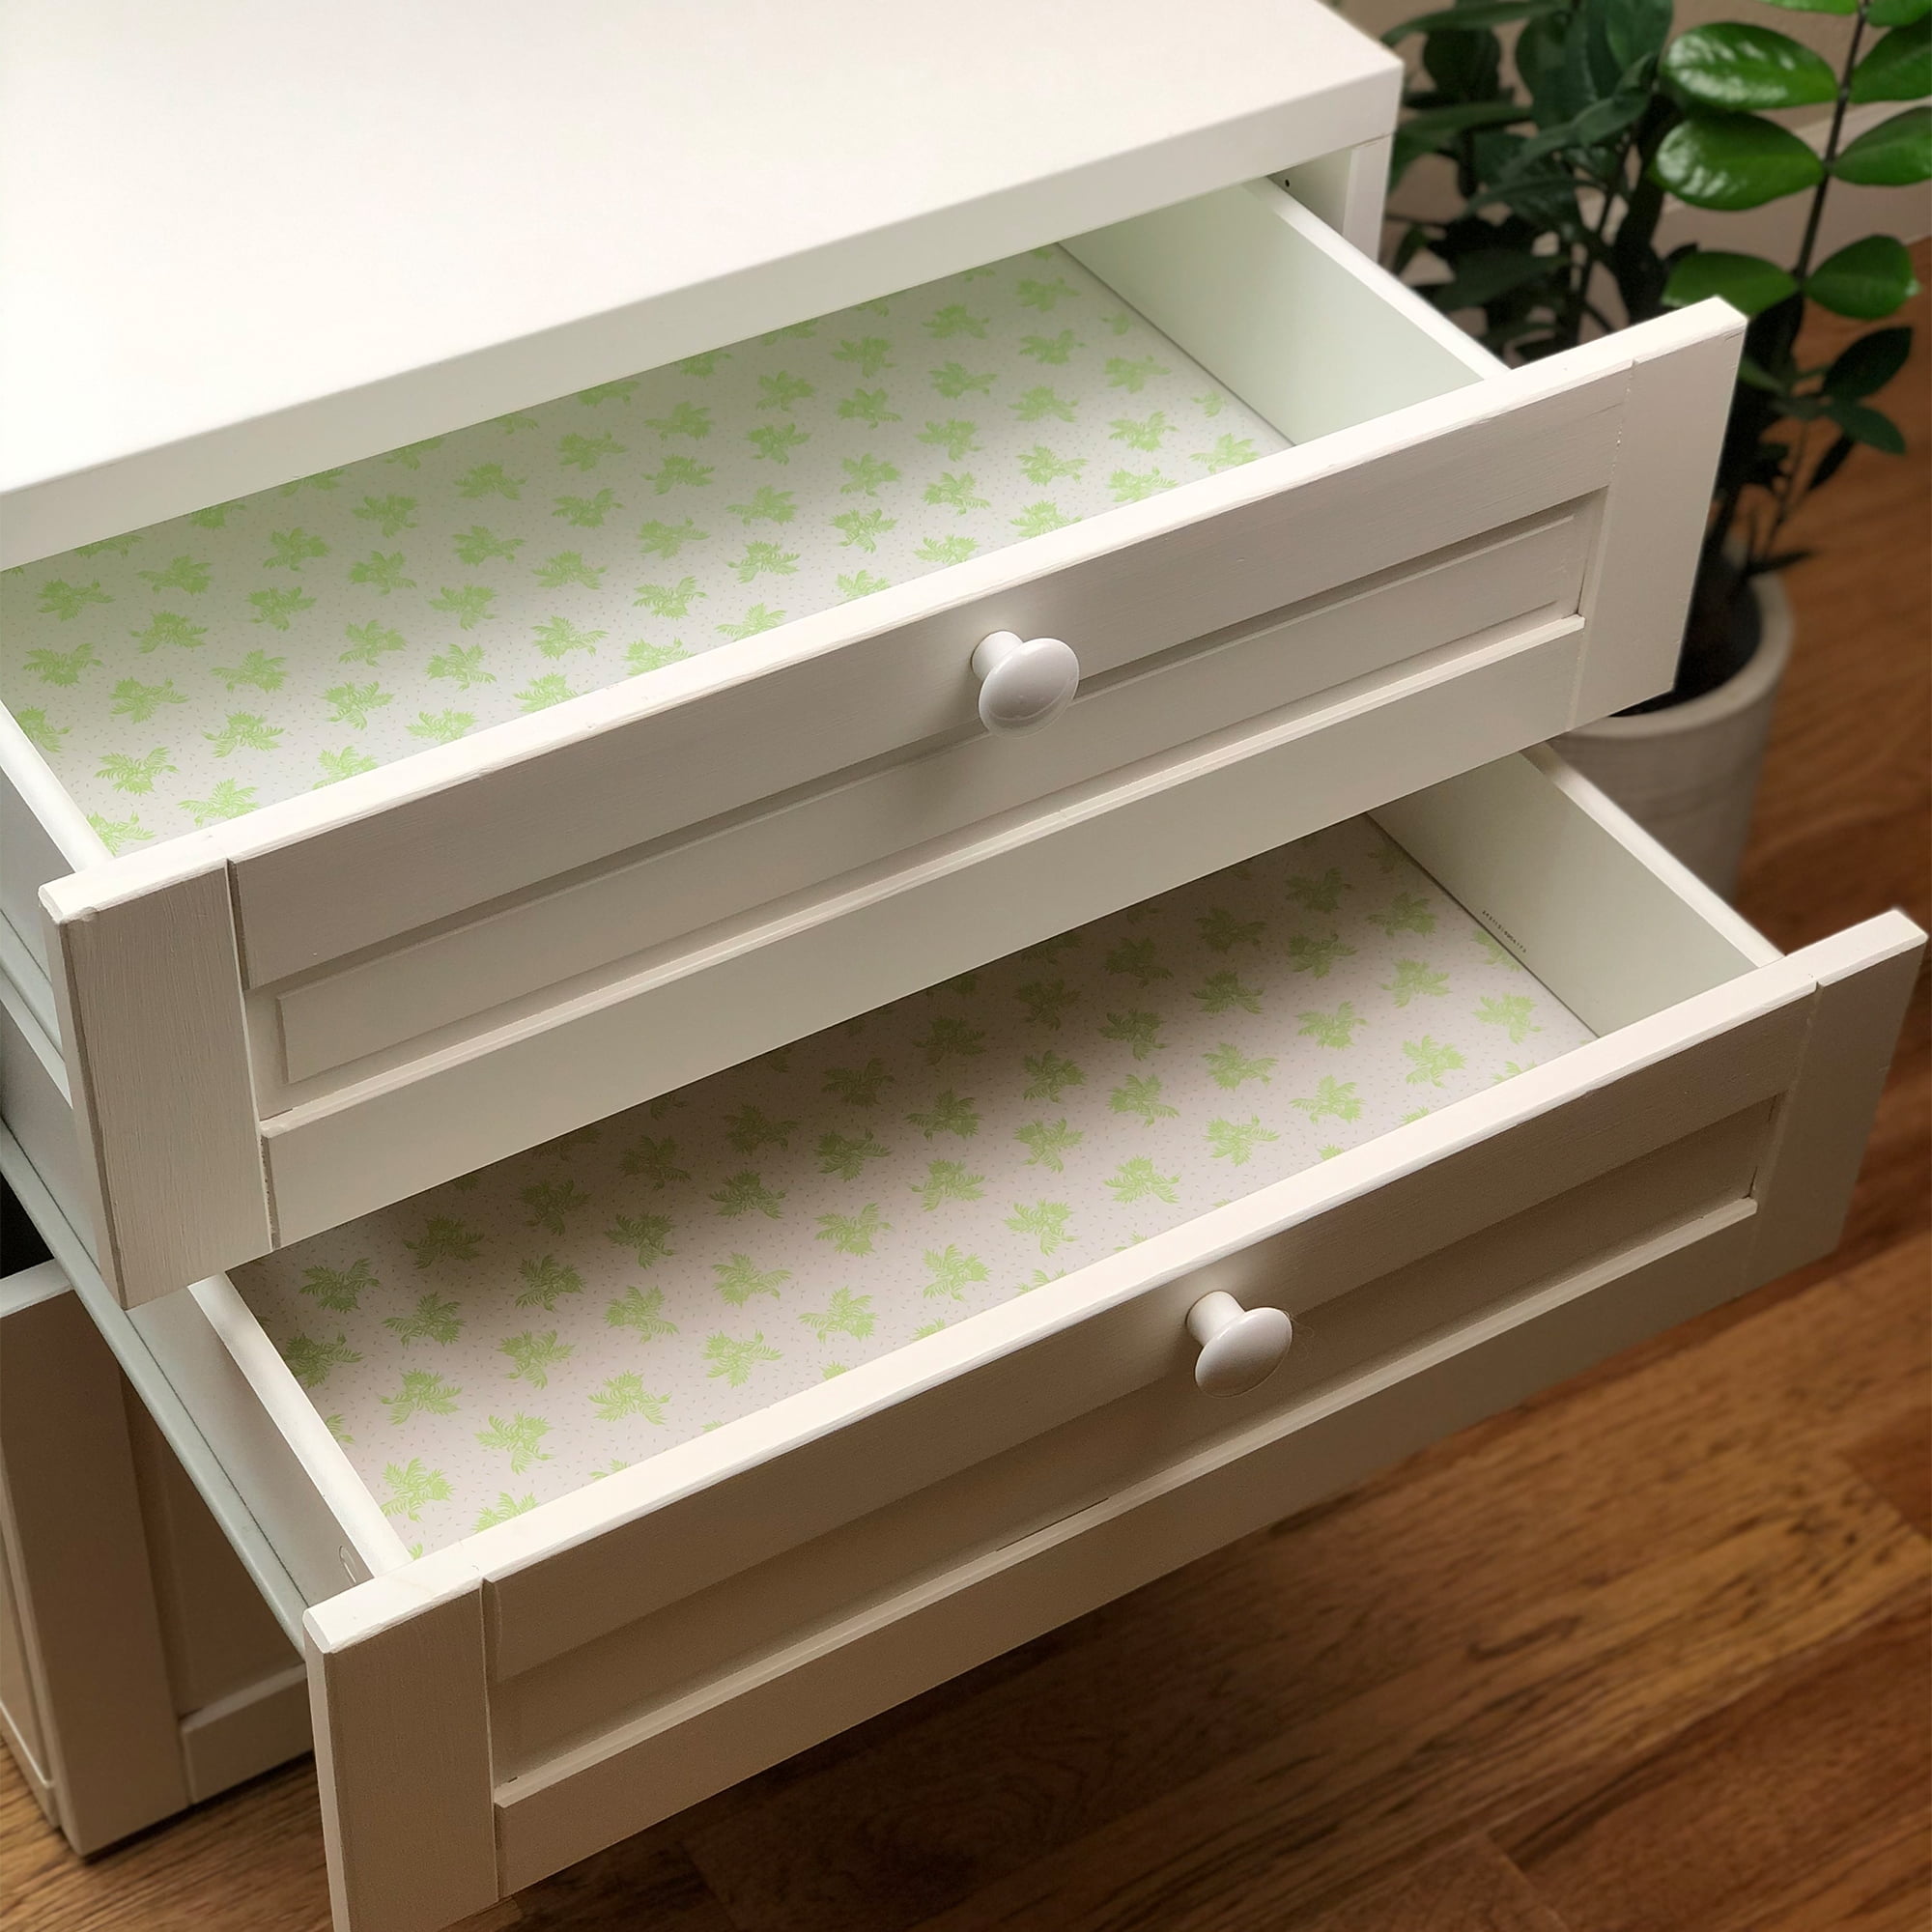 How To Install Scented Drawer Liners